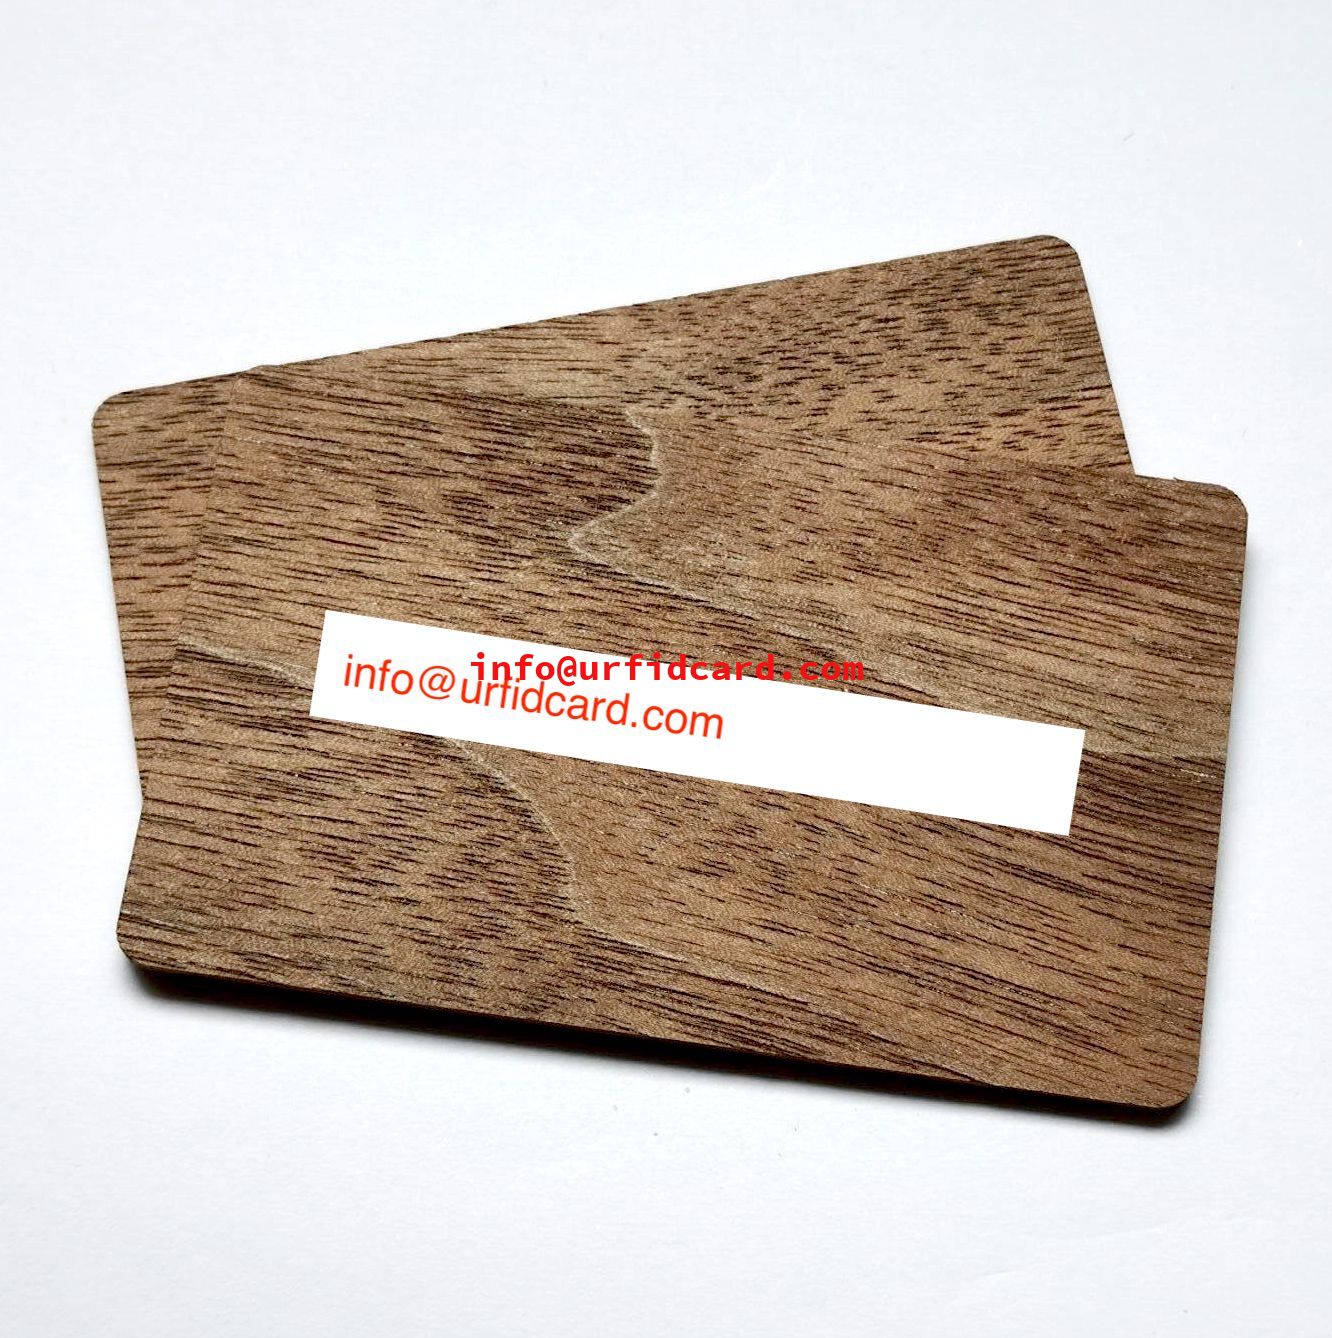 Hospitality Keycards In Wood and Paper Material